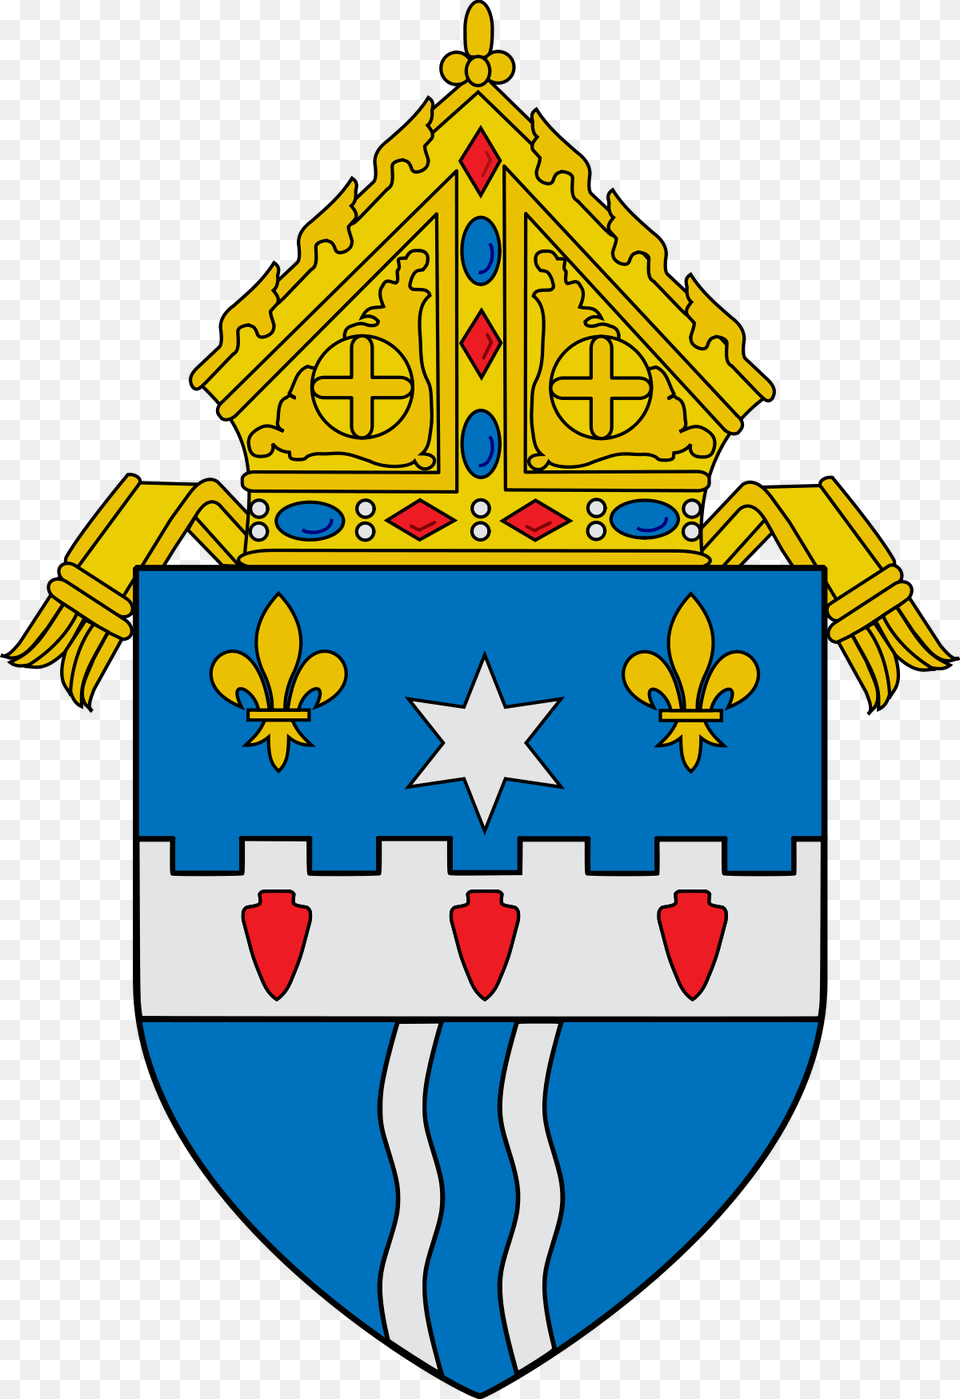 Archdiocese Of Newark Coat Of Arms, Armor, Shield Png